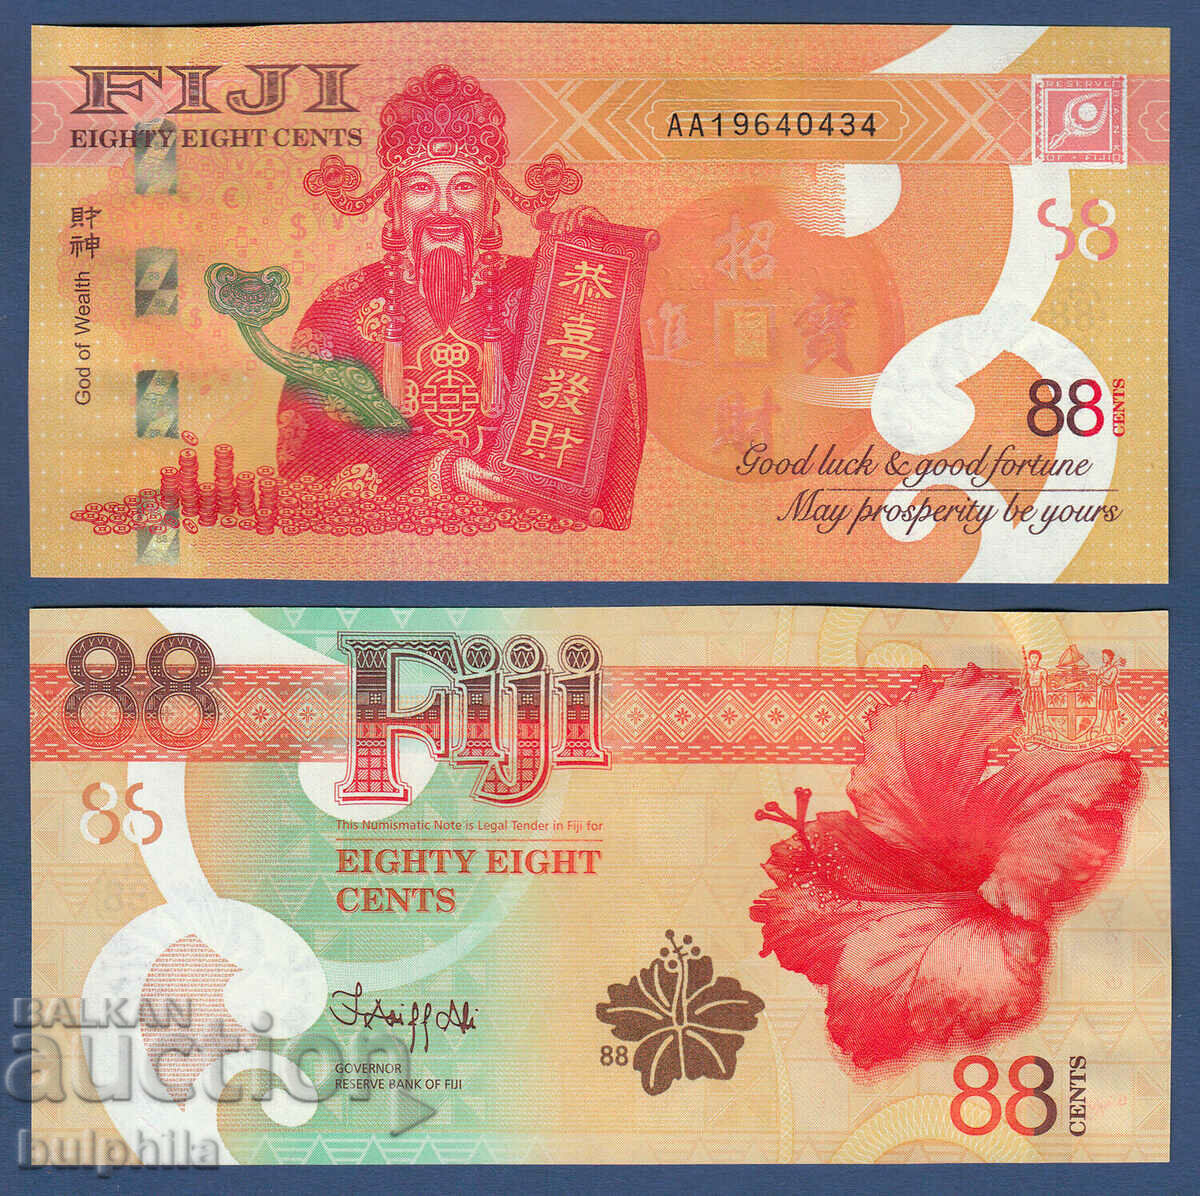 Fiji. Jubilee banknote with a denomination of 88.